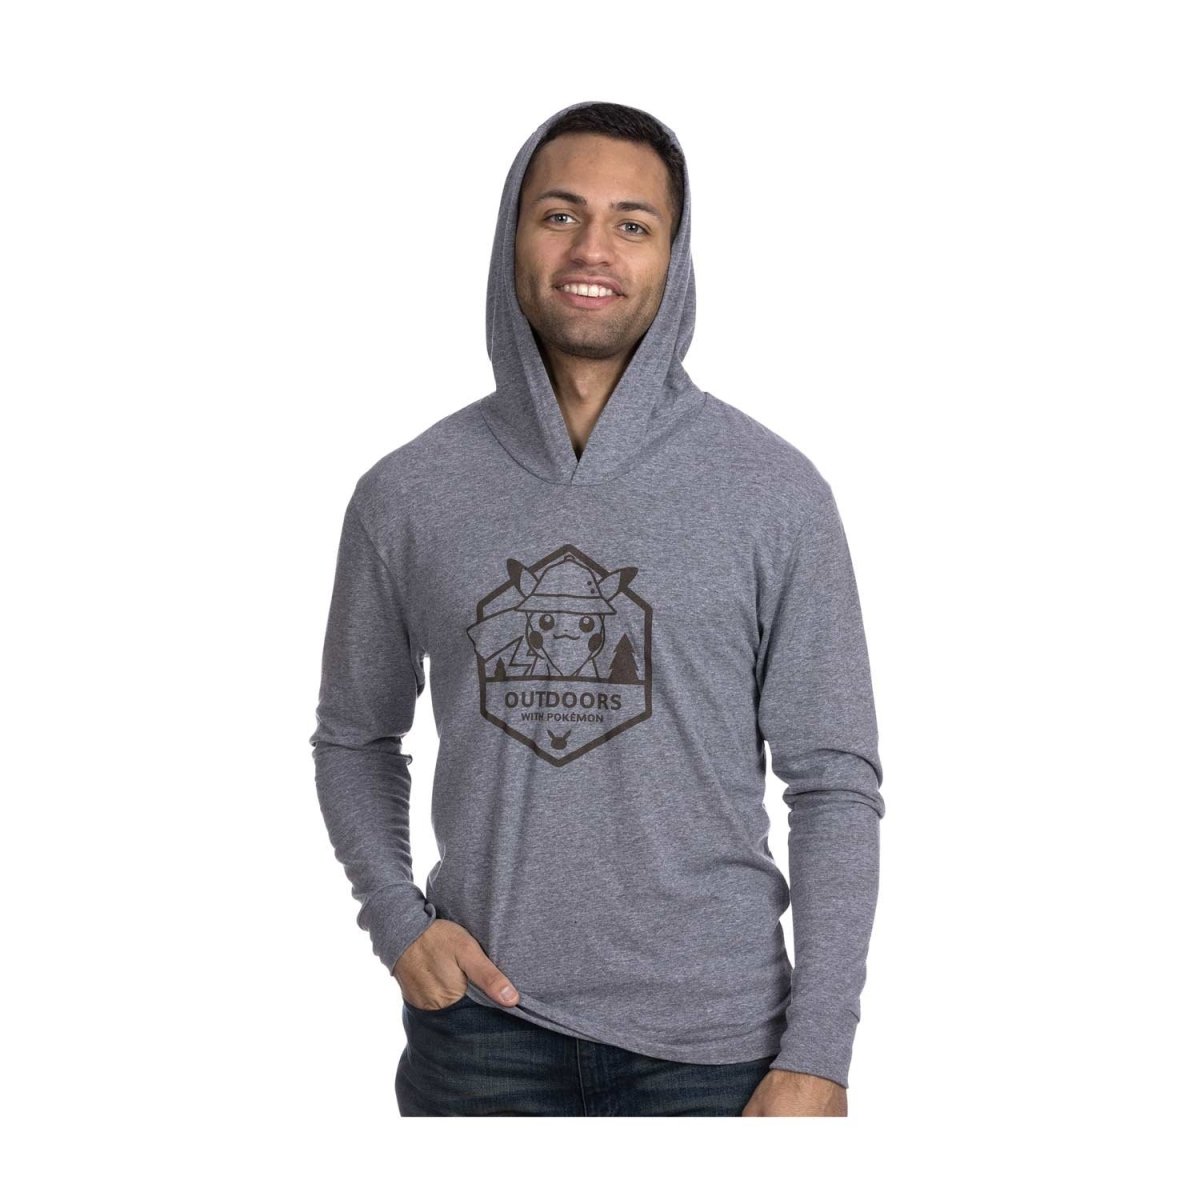 Outdoors with Pokémon Heather Gray Hooded Long-Sleeve Shirt - Adult ...